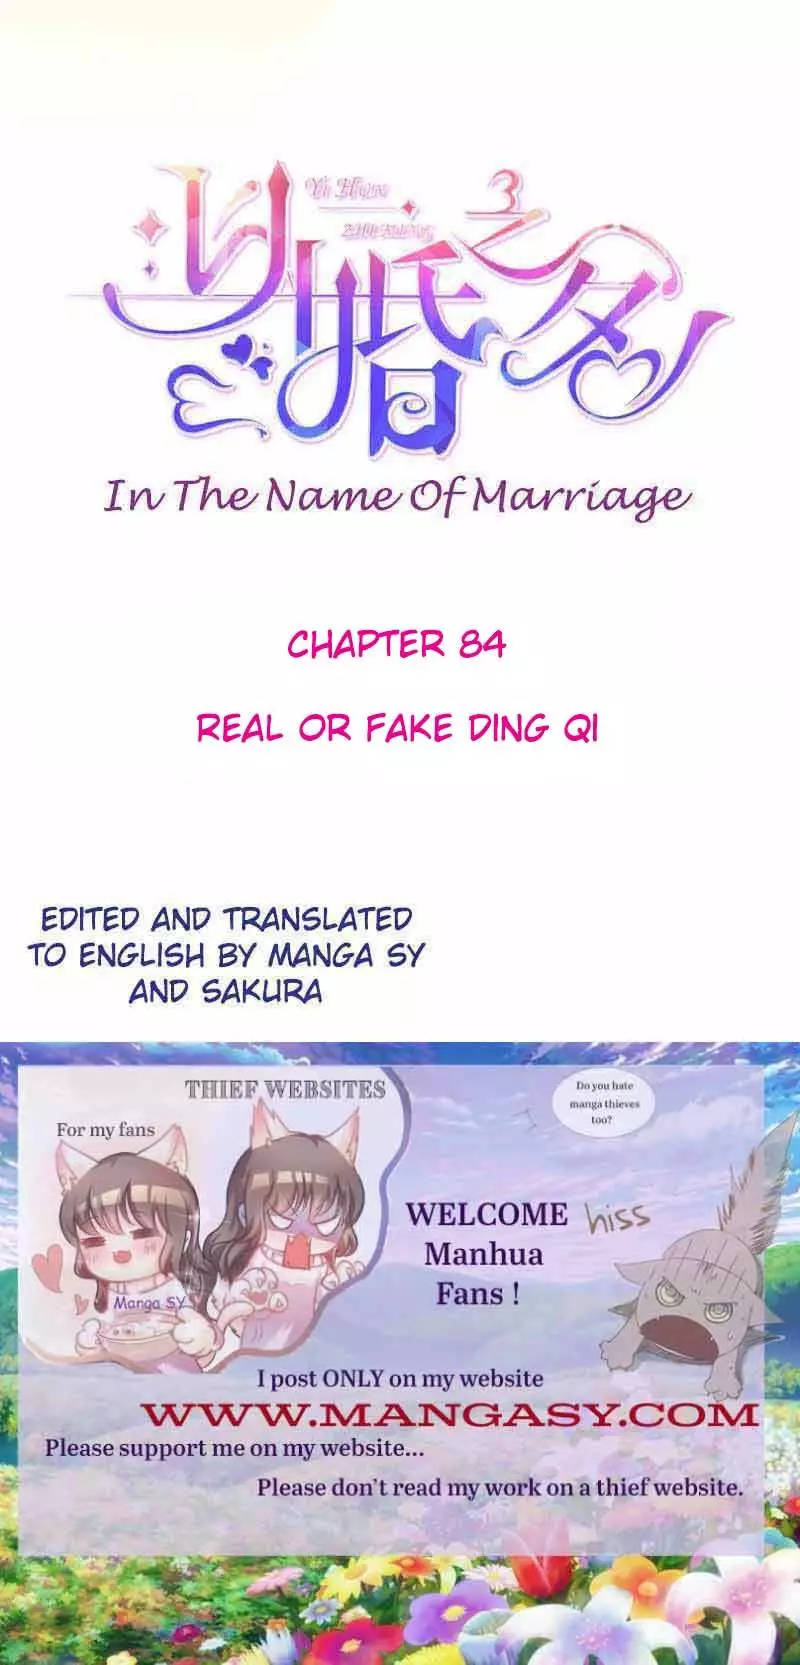 In The Name Of Marriage - 84 page 1-70aa7a8d